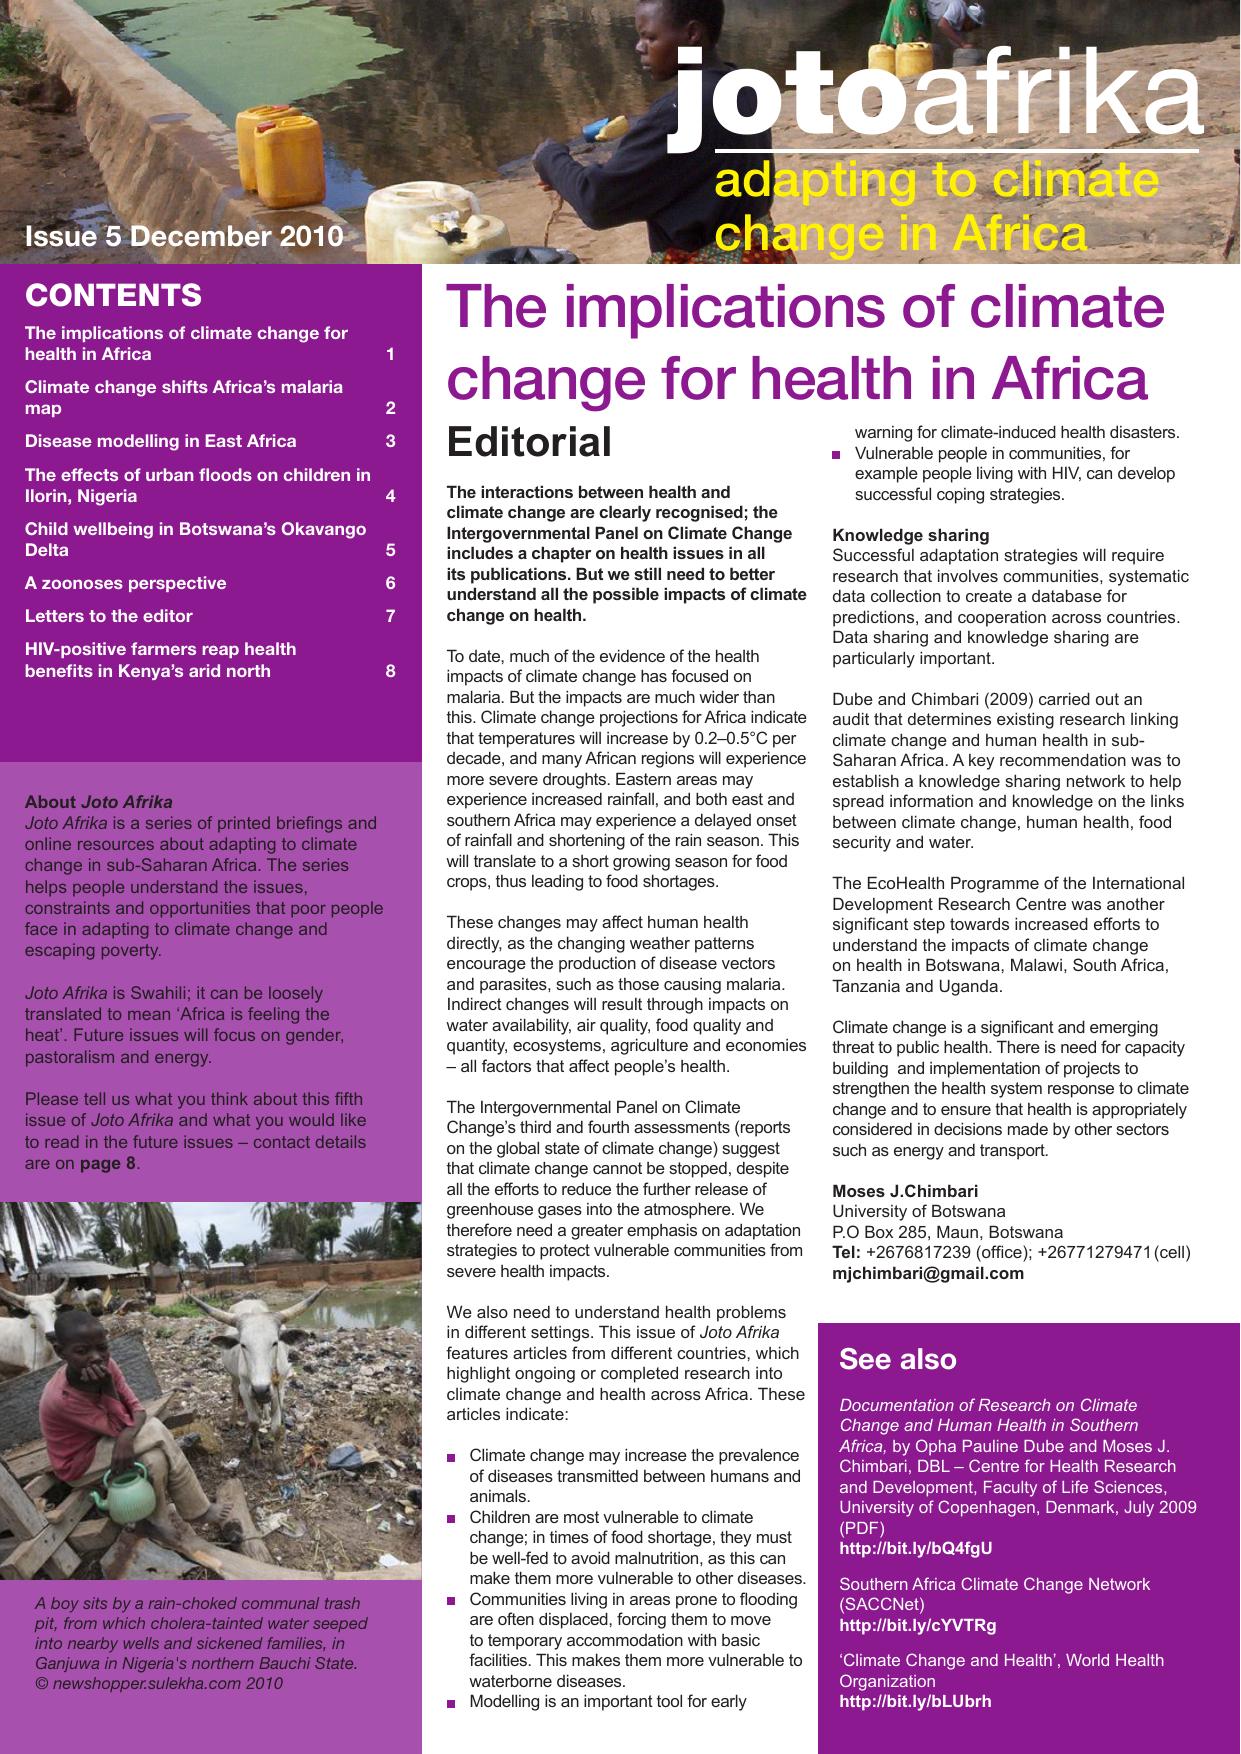 The implications of climate change for health in Africa, 2010